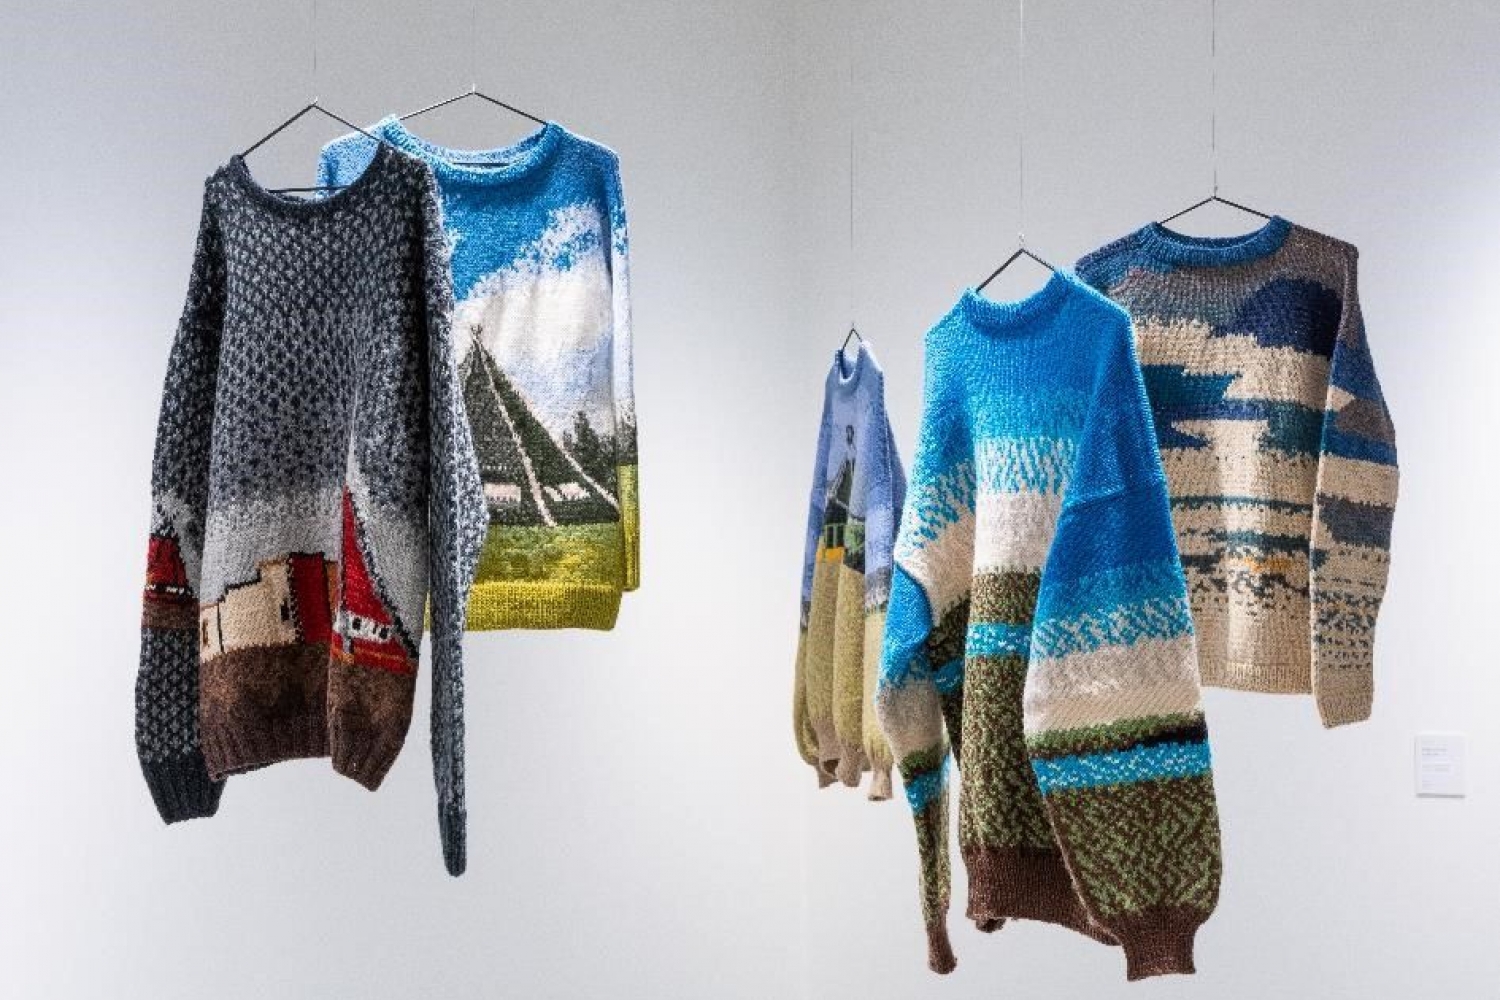 exhibition of nitted sweaters